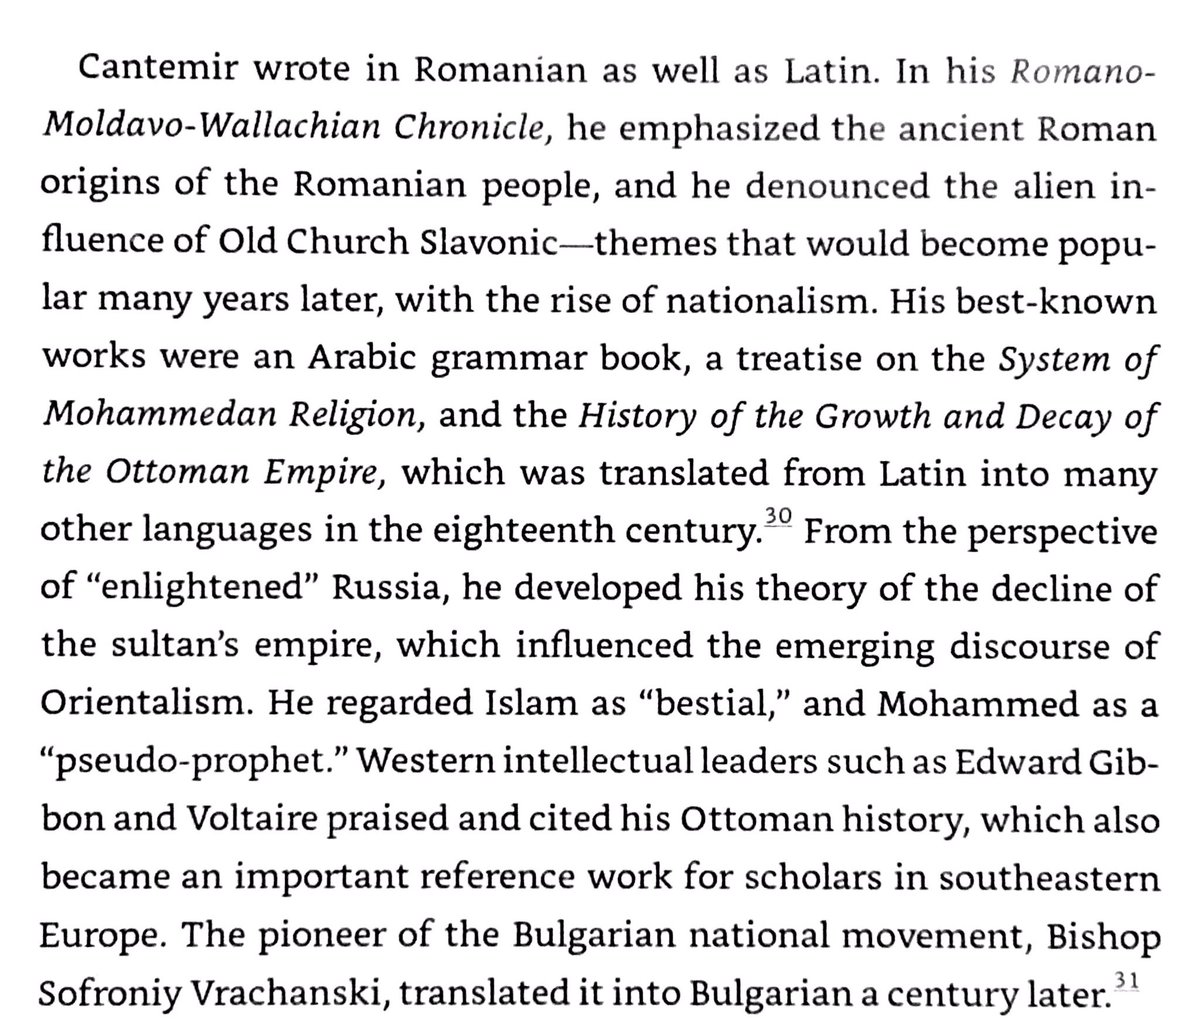 Some pan-Christian & nationalist figures in early 18th century Balkans supported Russia as a possible savior from the Ottomans. One was Moldavian Prince Cantemir, who revolted against Ottomans & joined Peter the Great in his failed campaign against them.